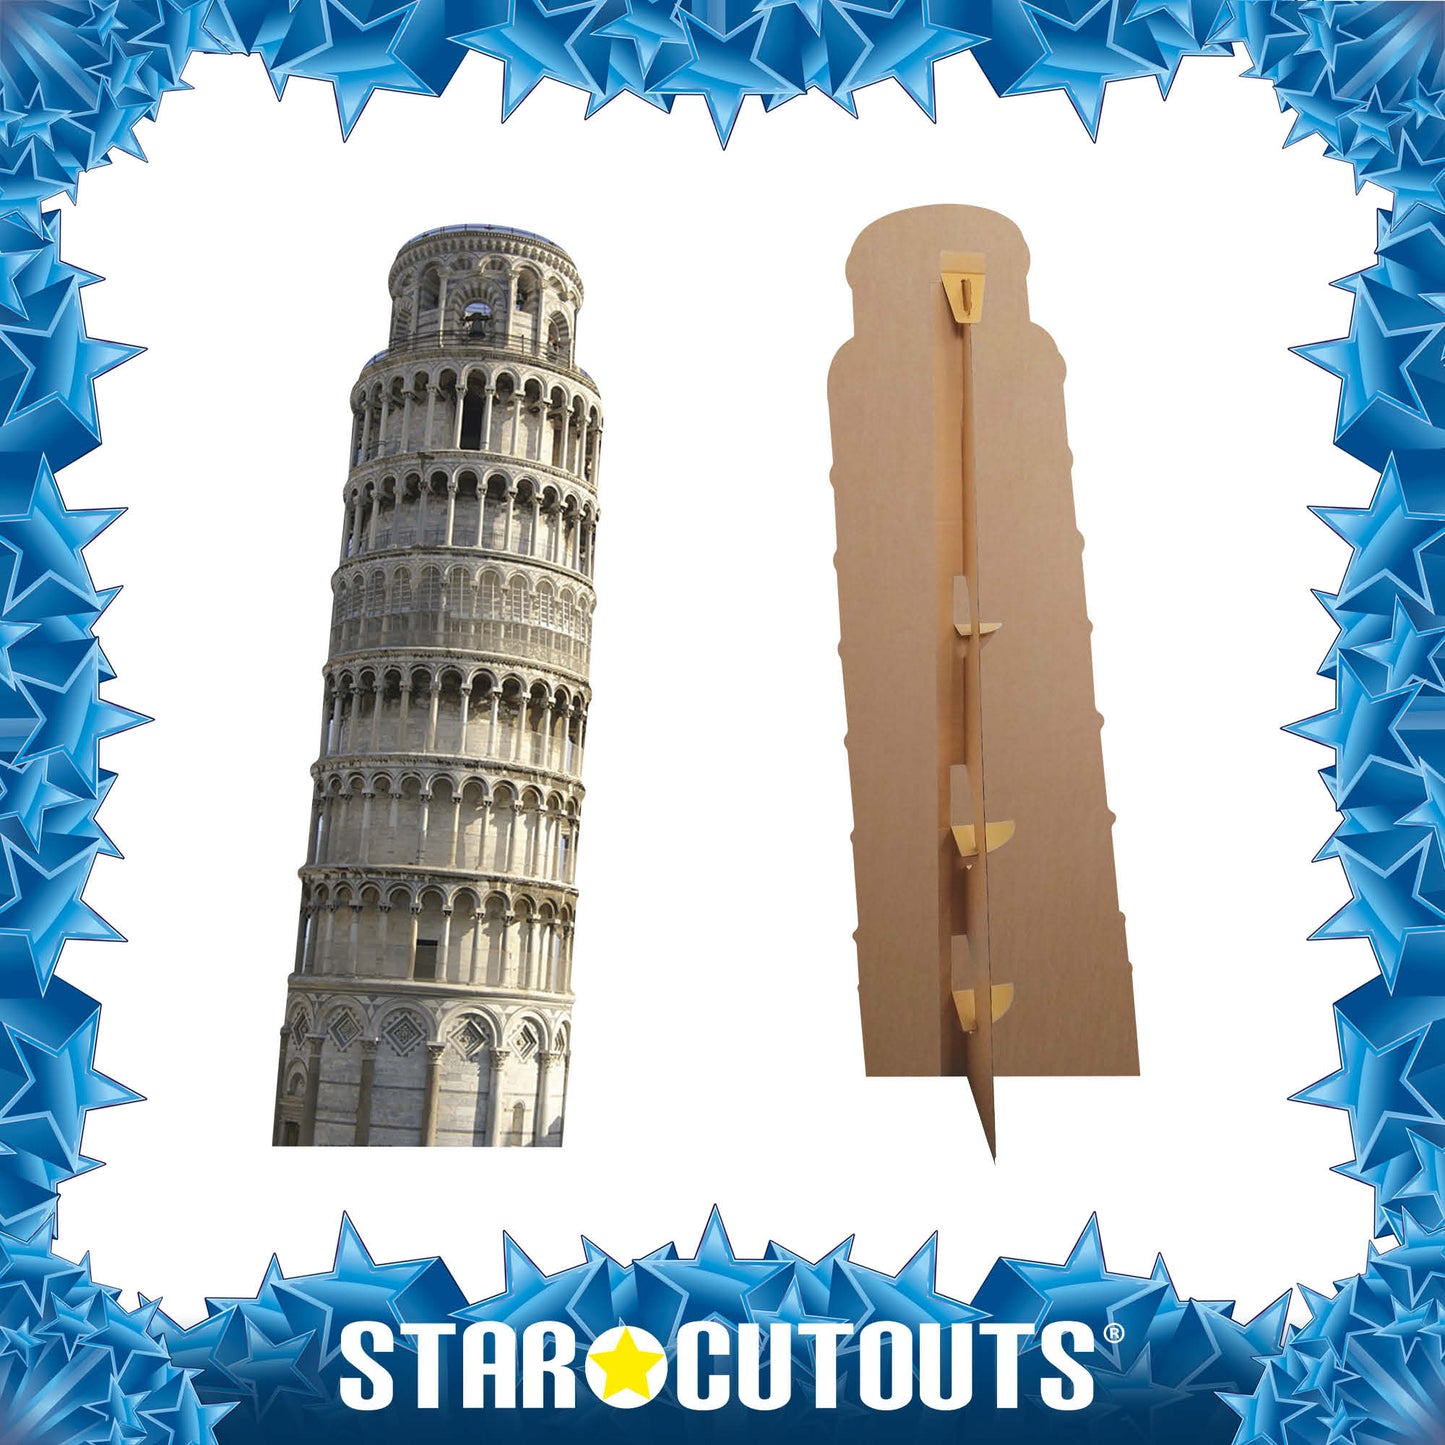 SC222 The Leaning Tower of Pisa Cardboard Cut Out Height 174cm